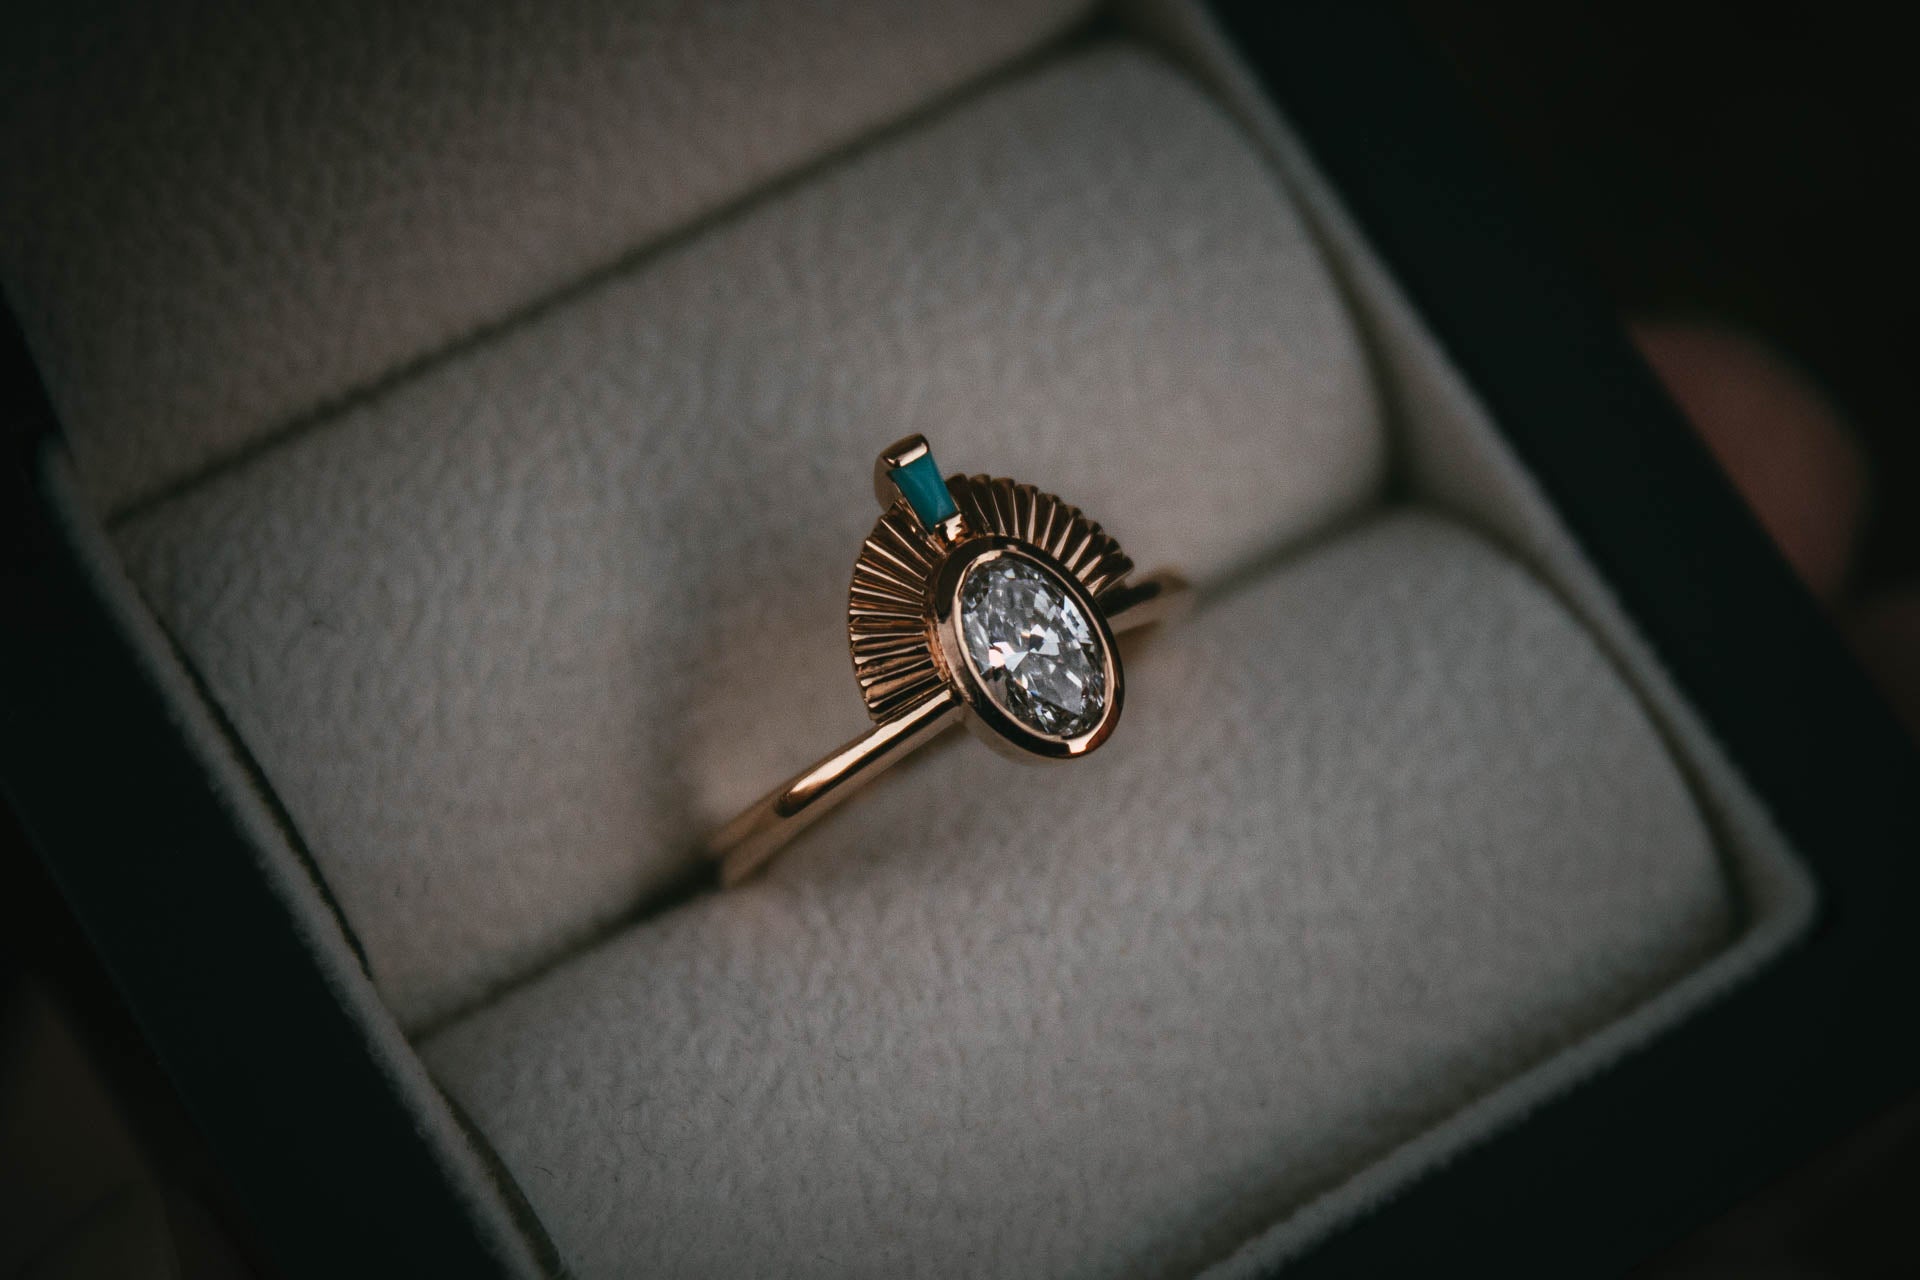 Moira Patience Fine Jewellery Bespoke Oval Canadian Diamond and Turquoise Engagement Ring